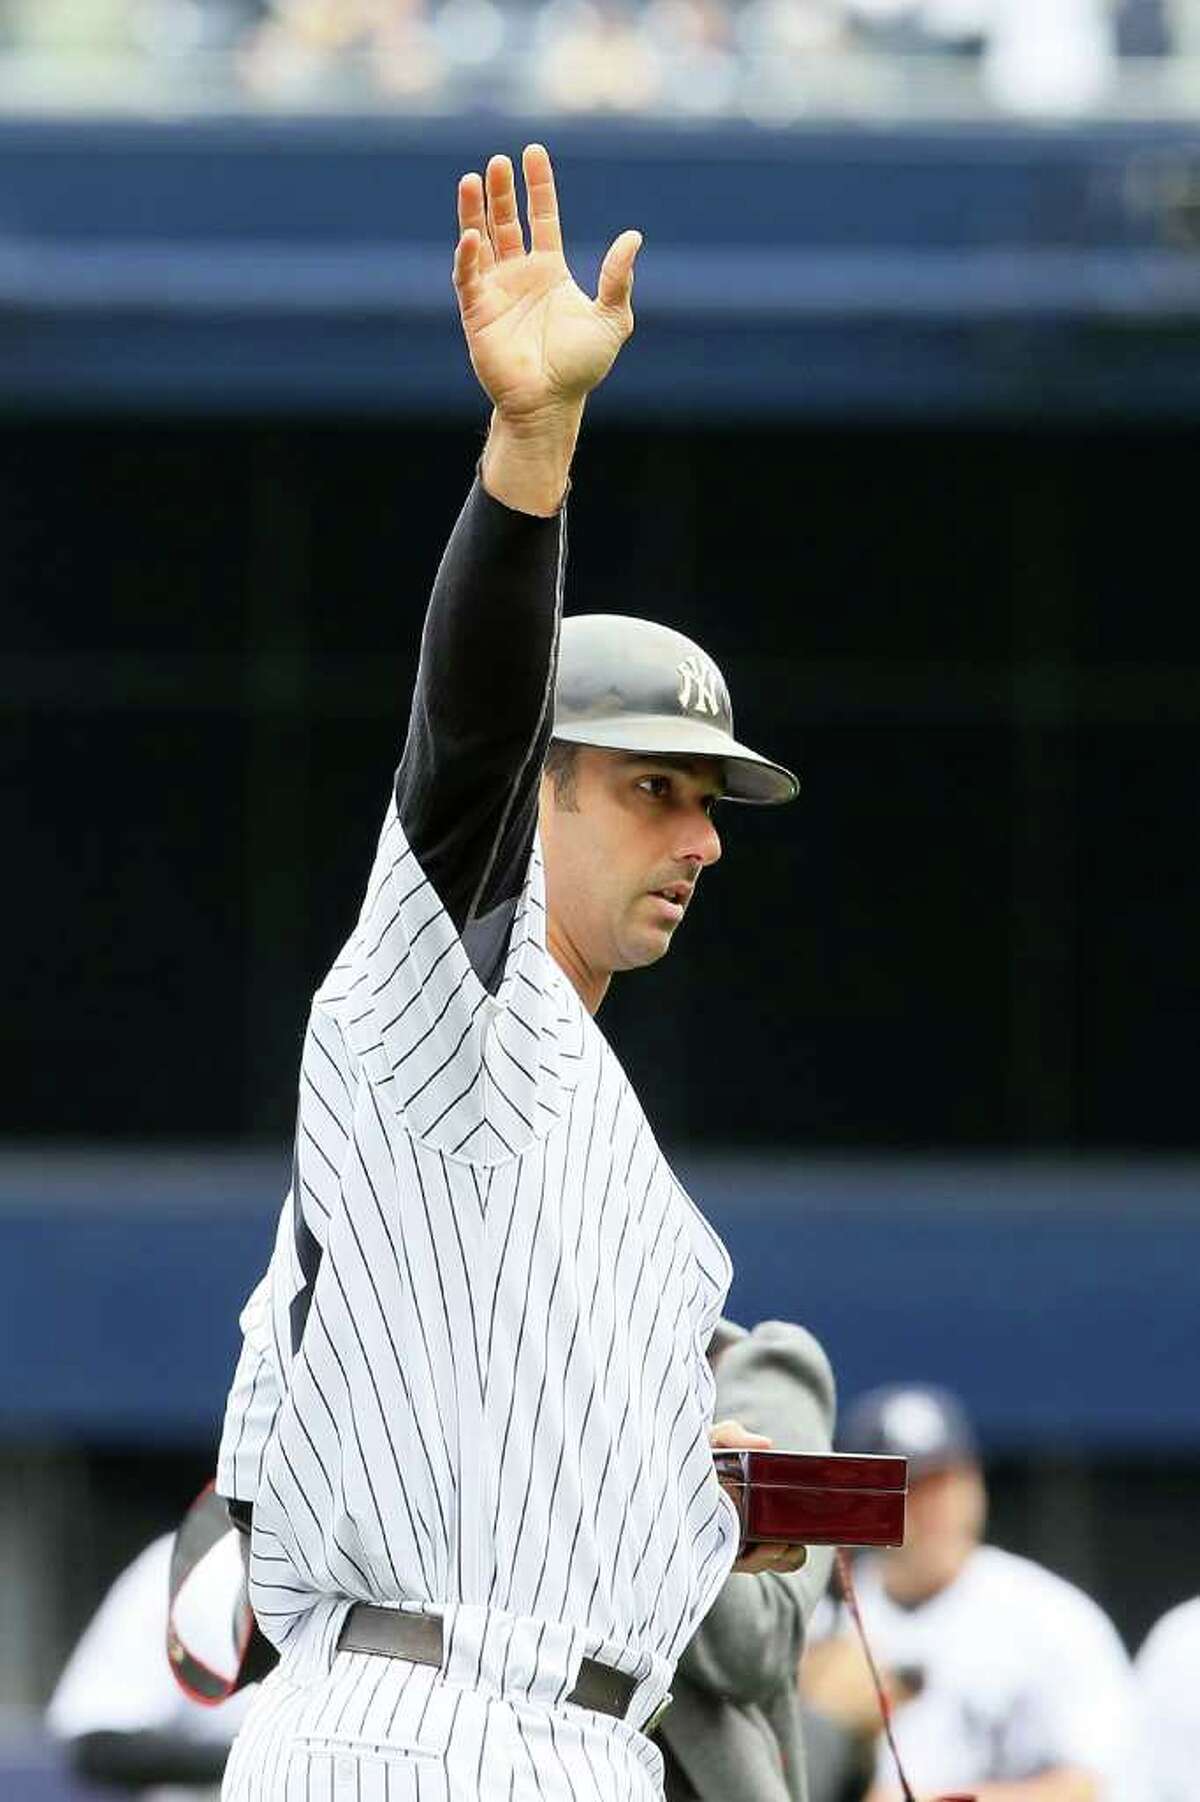 BRONX, NY - SEPTEMBER 09: Jorge Posada is introduced during the